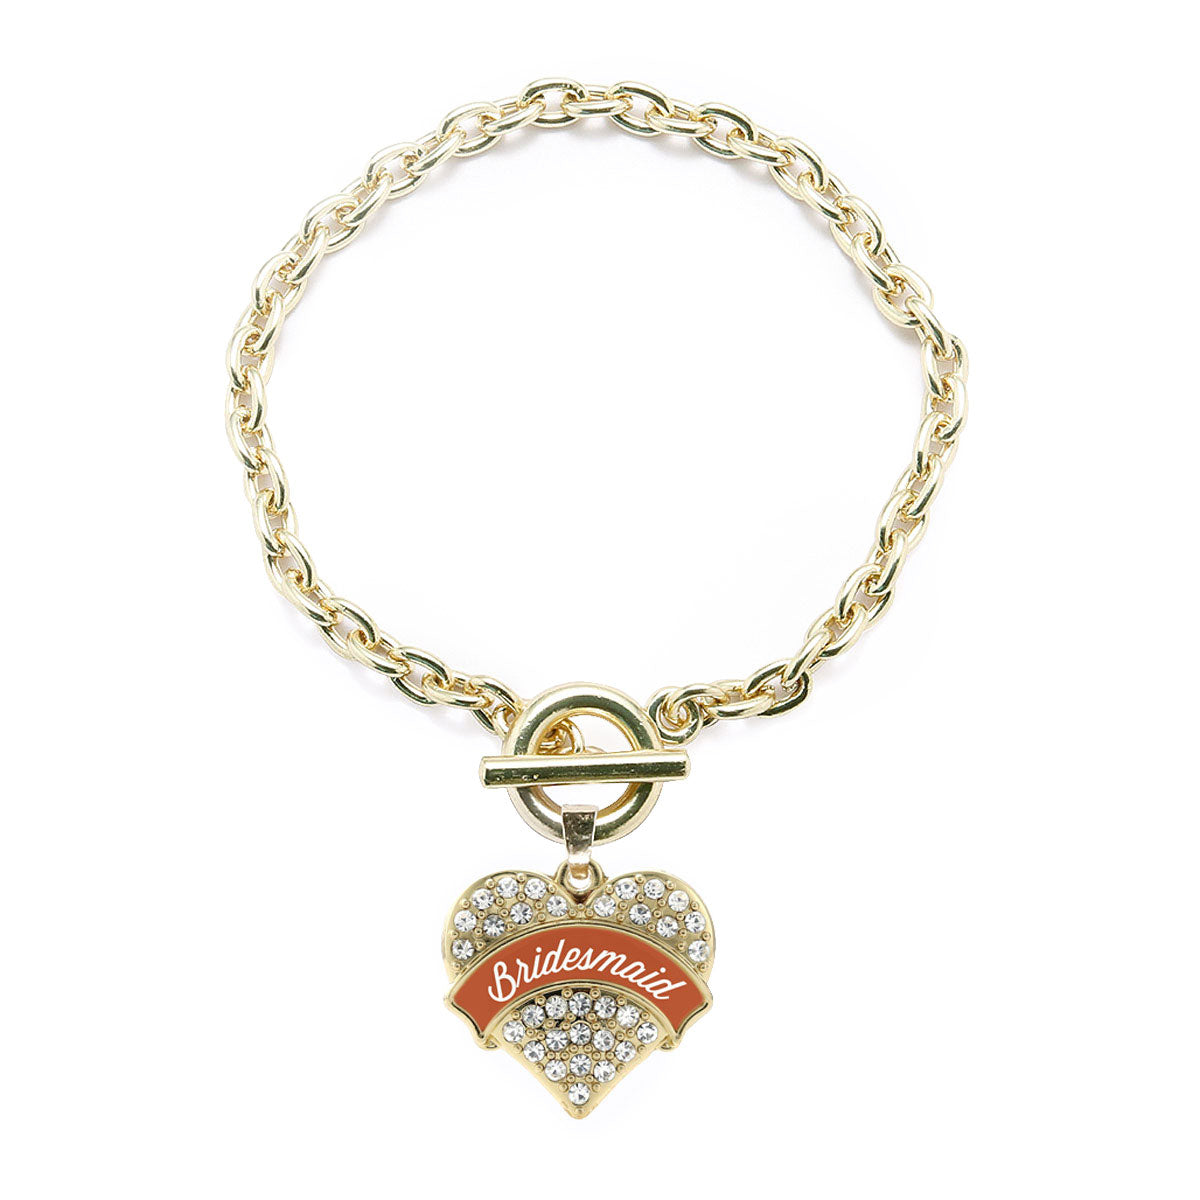 Gold Rust Bridesmaid Pave Heart Charm Toggle Bracelet